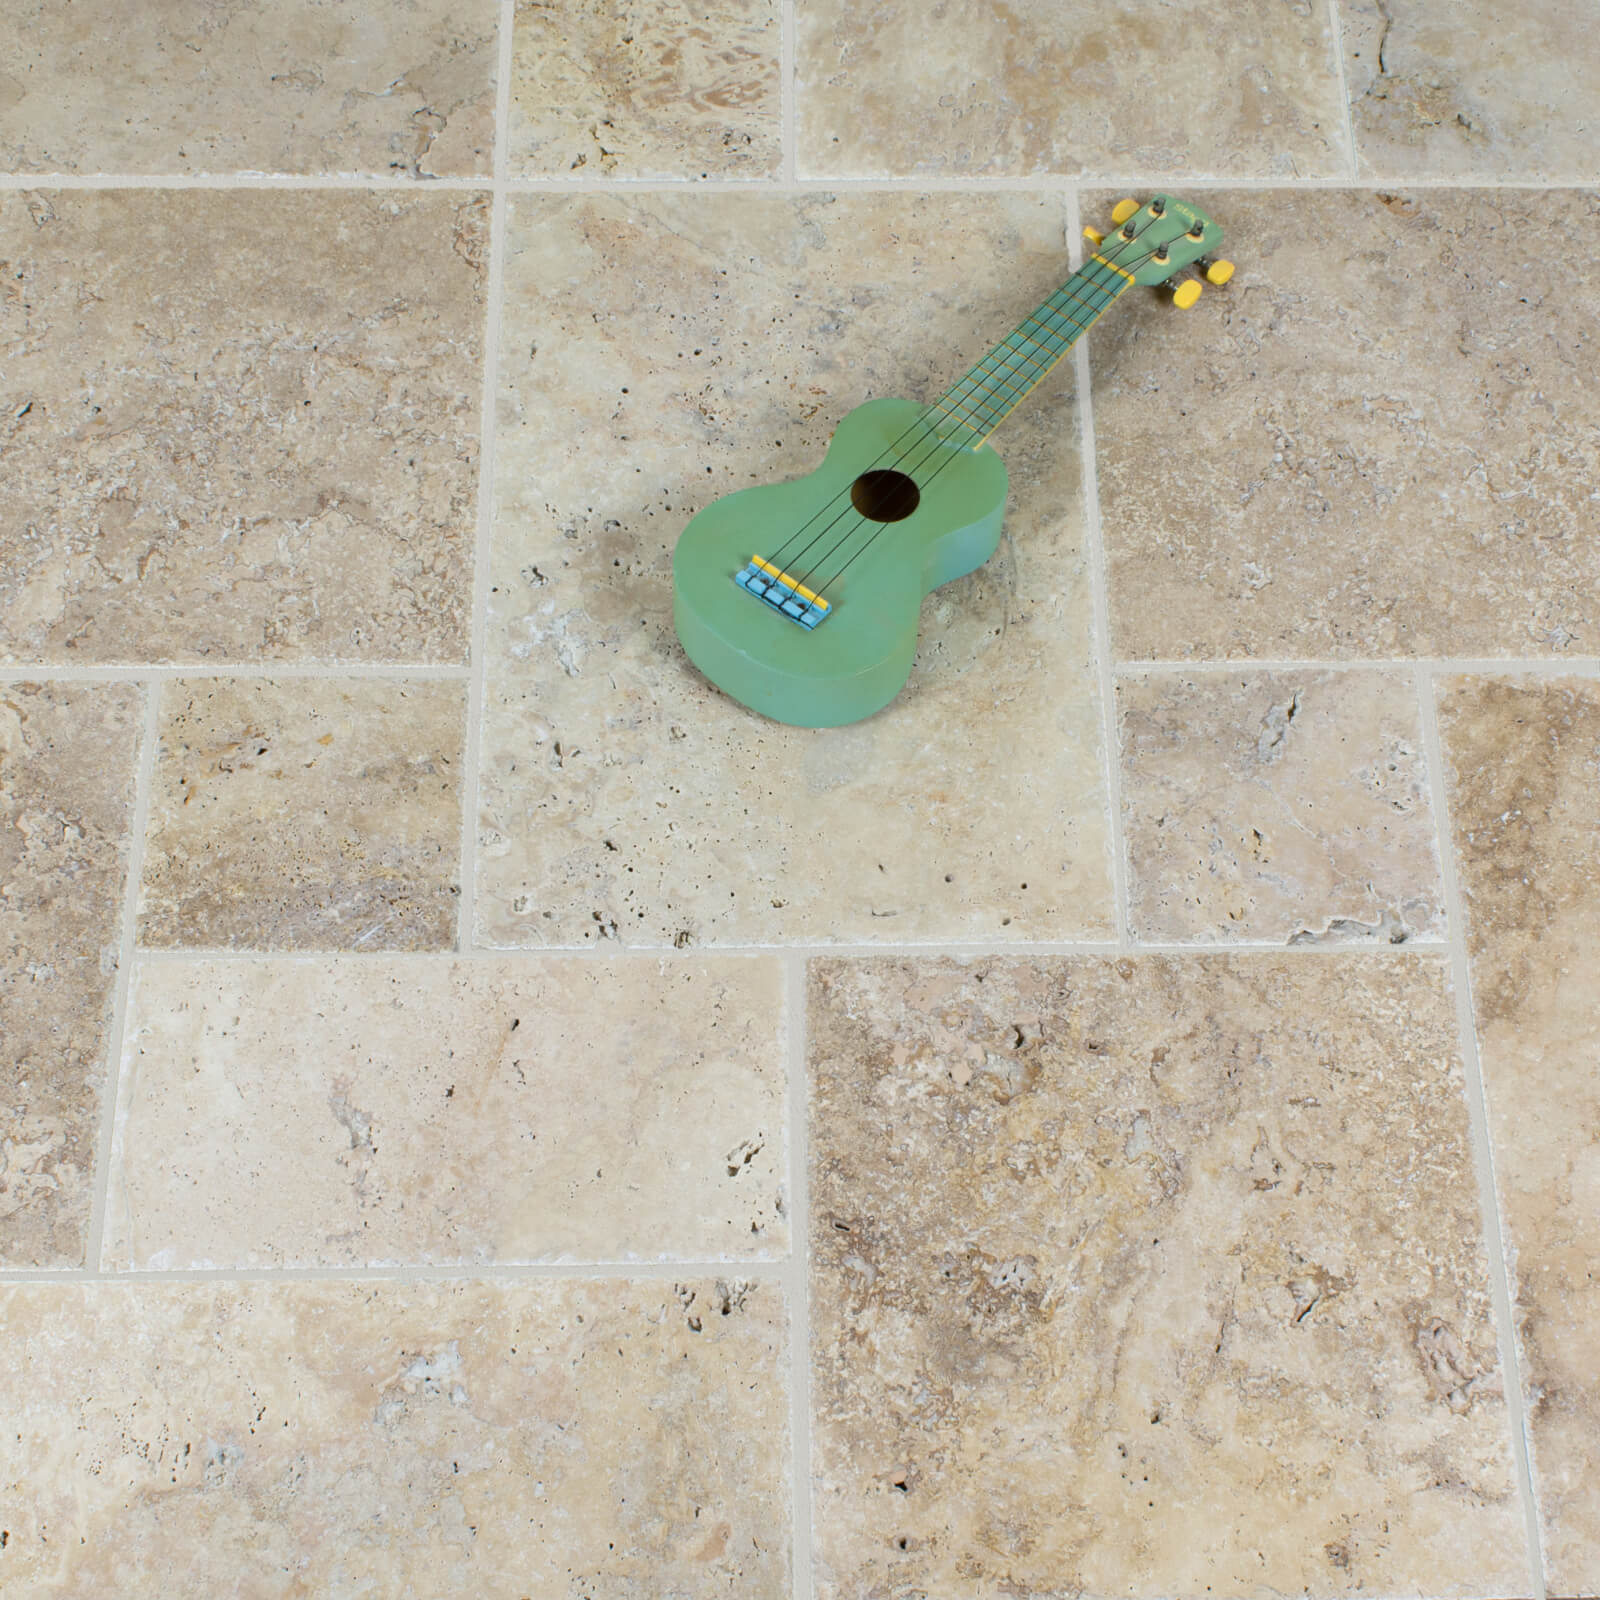 Classic Travertine Tile - Unfilled & Brushed Chiselled Edge